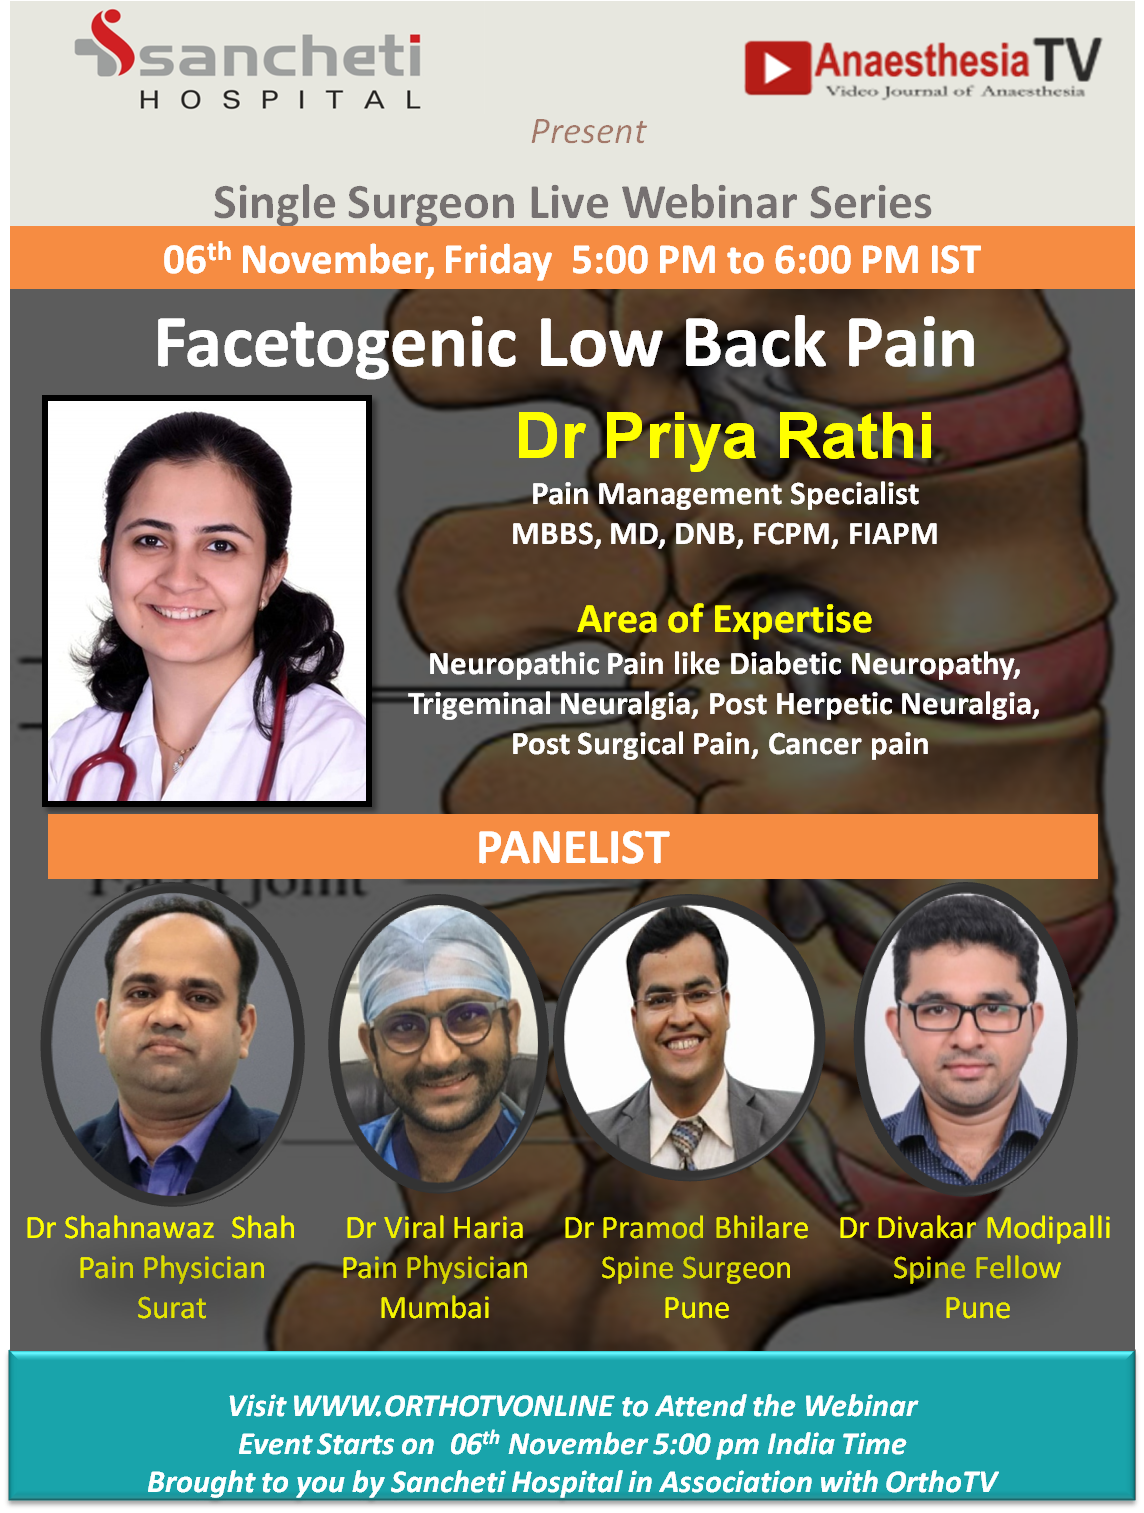 Facetogenic Low Back Pain by Dr Priya Rathi